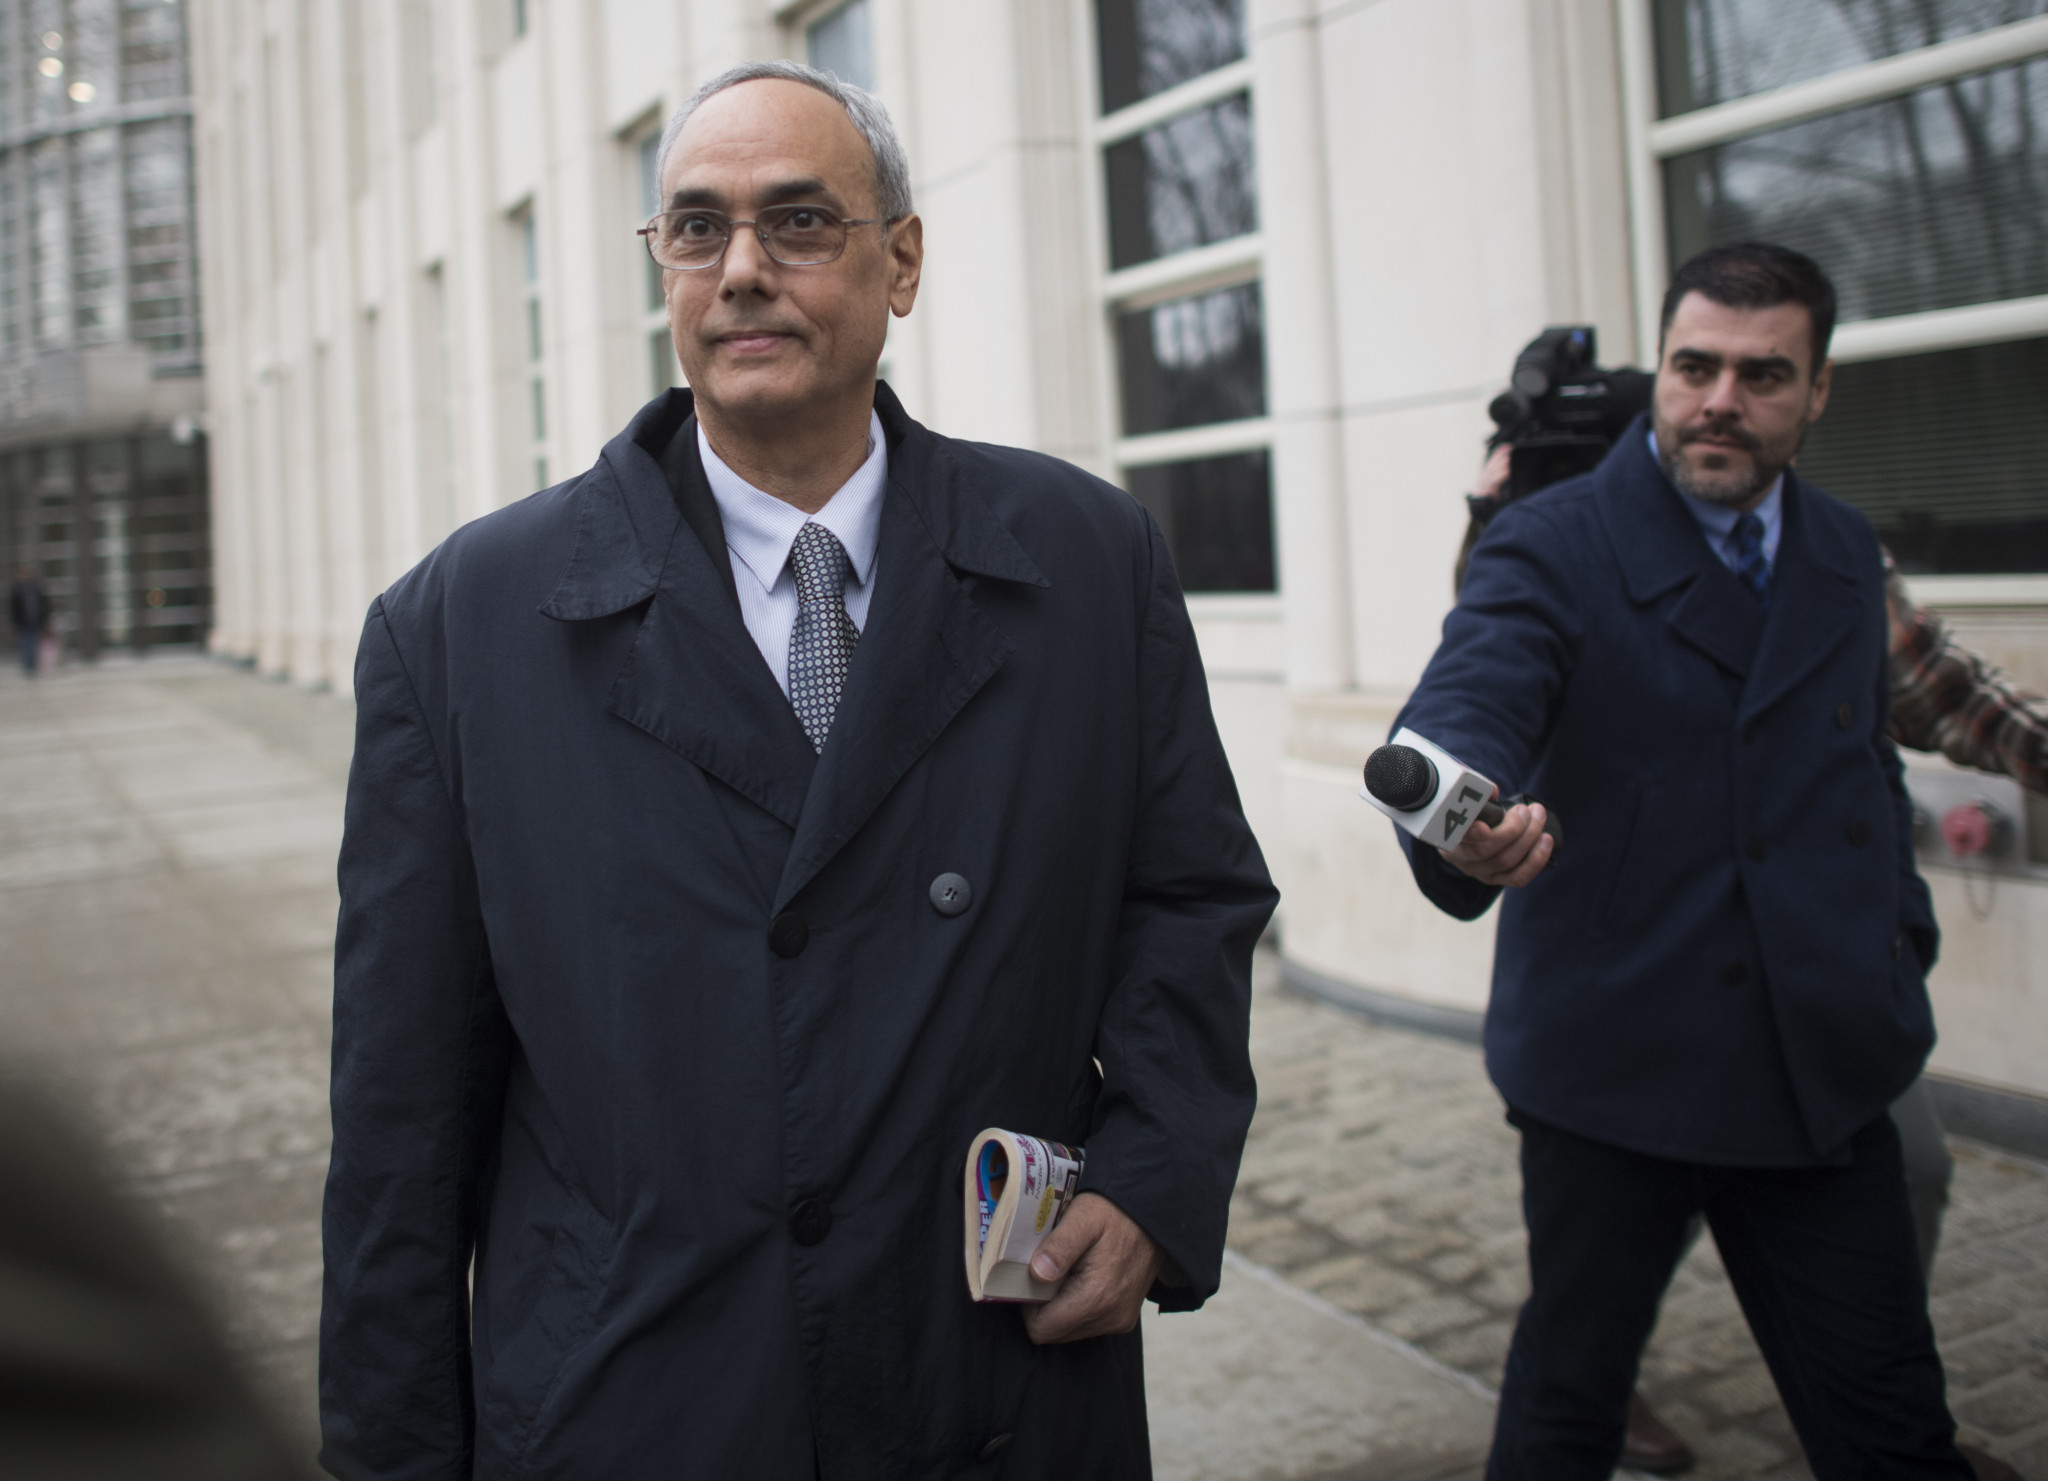 Burga acquitted of corruption charges as FIFA trial concludes in New York